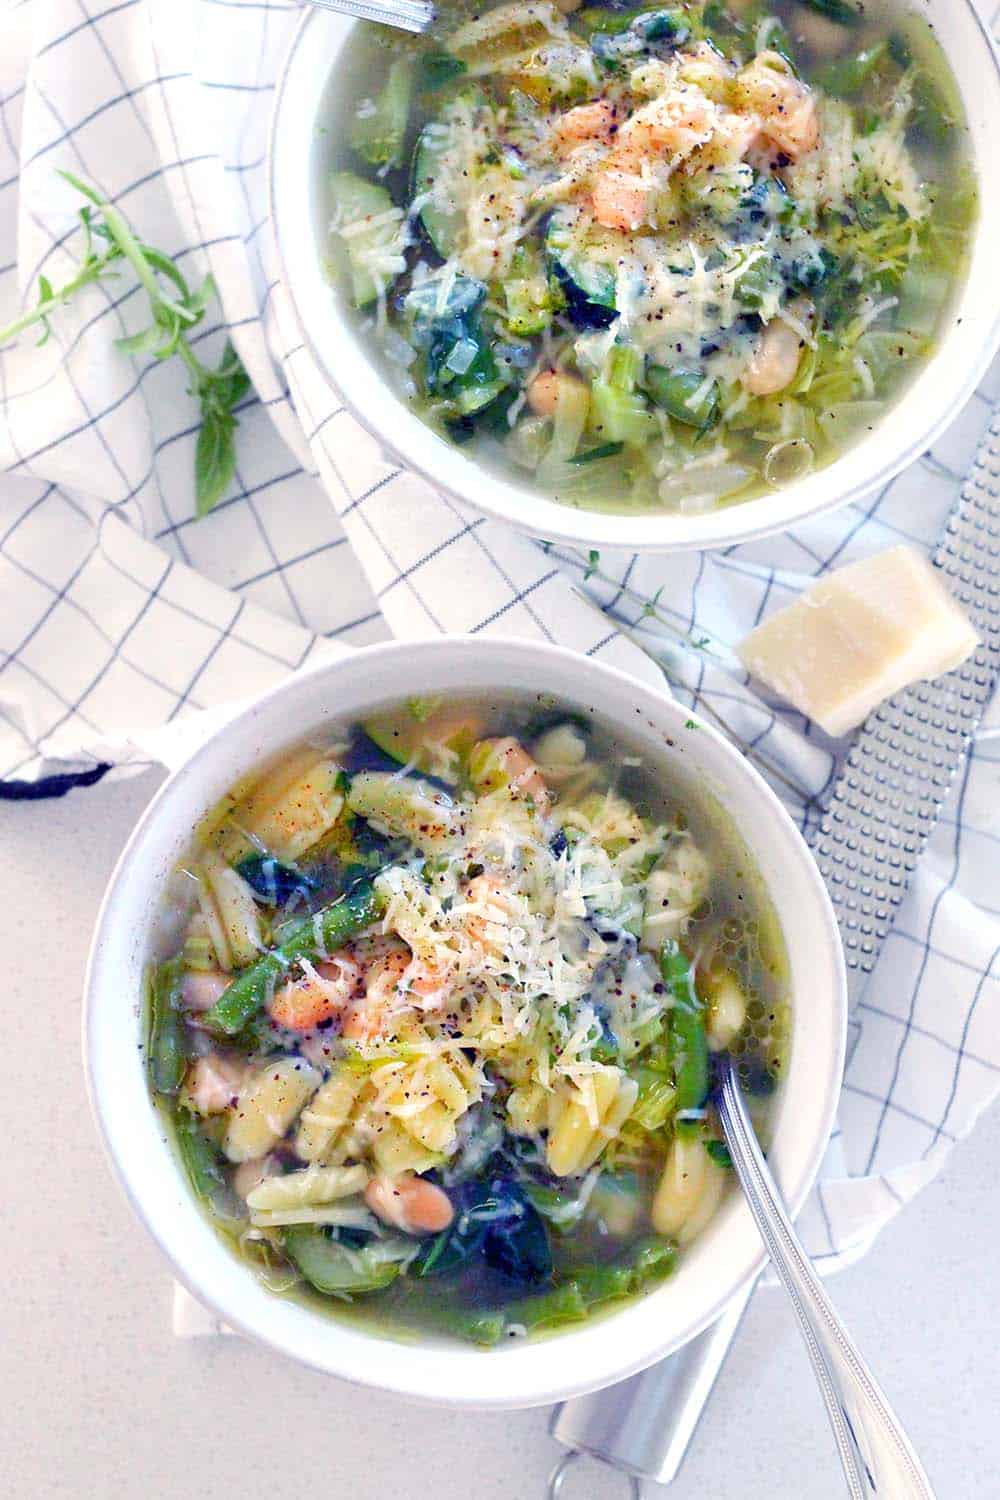 This minestrone soup is PACKED with healthy green veggies, fresh herbs, and topped with a drizzle of olive oil, Parmesan, and pepper. It comes together in 30 minutes and is freezable.